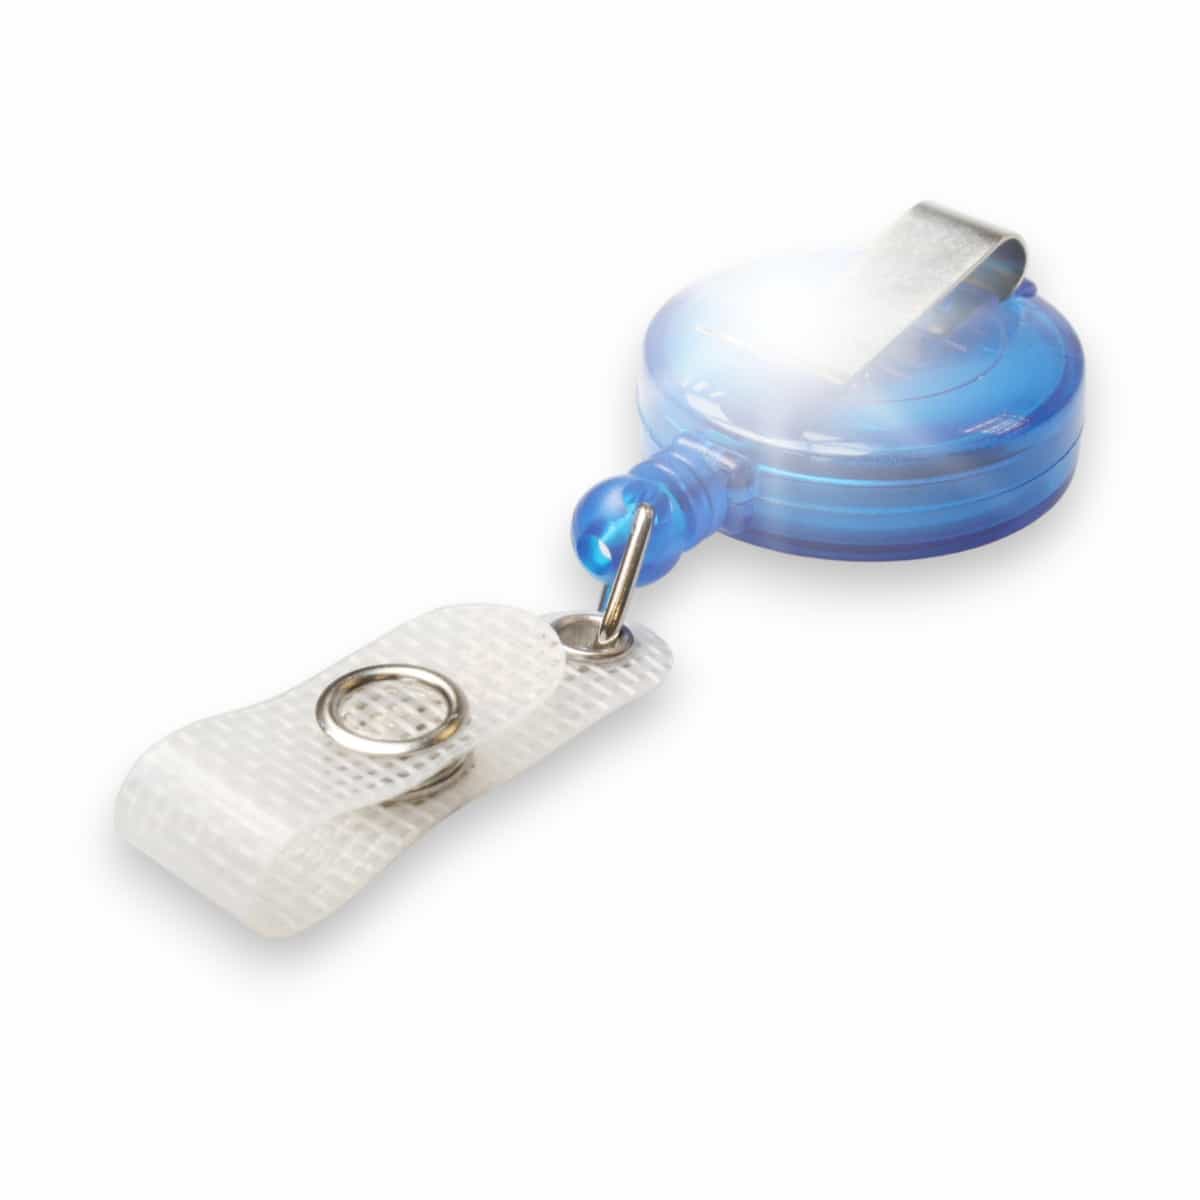 NHS Badge Reel with Strap Clip - The Lanyard Shop